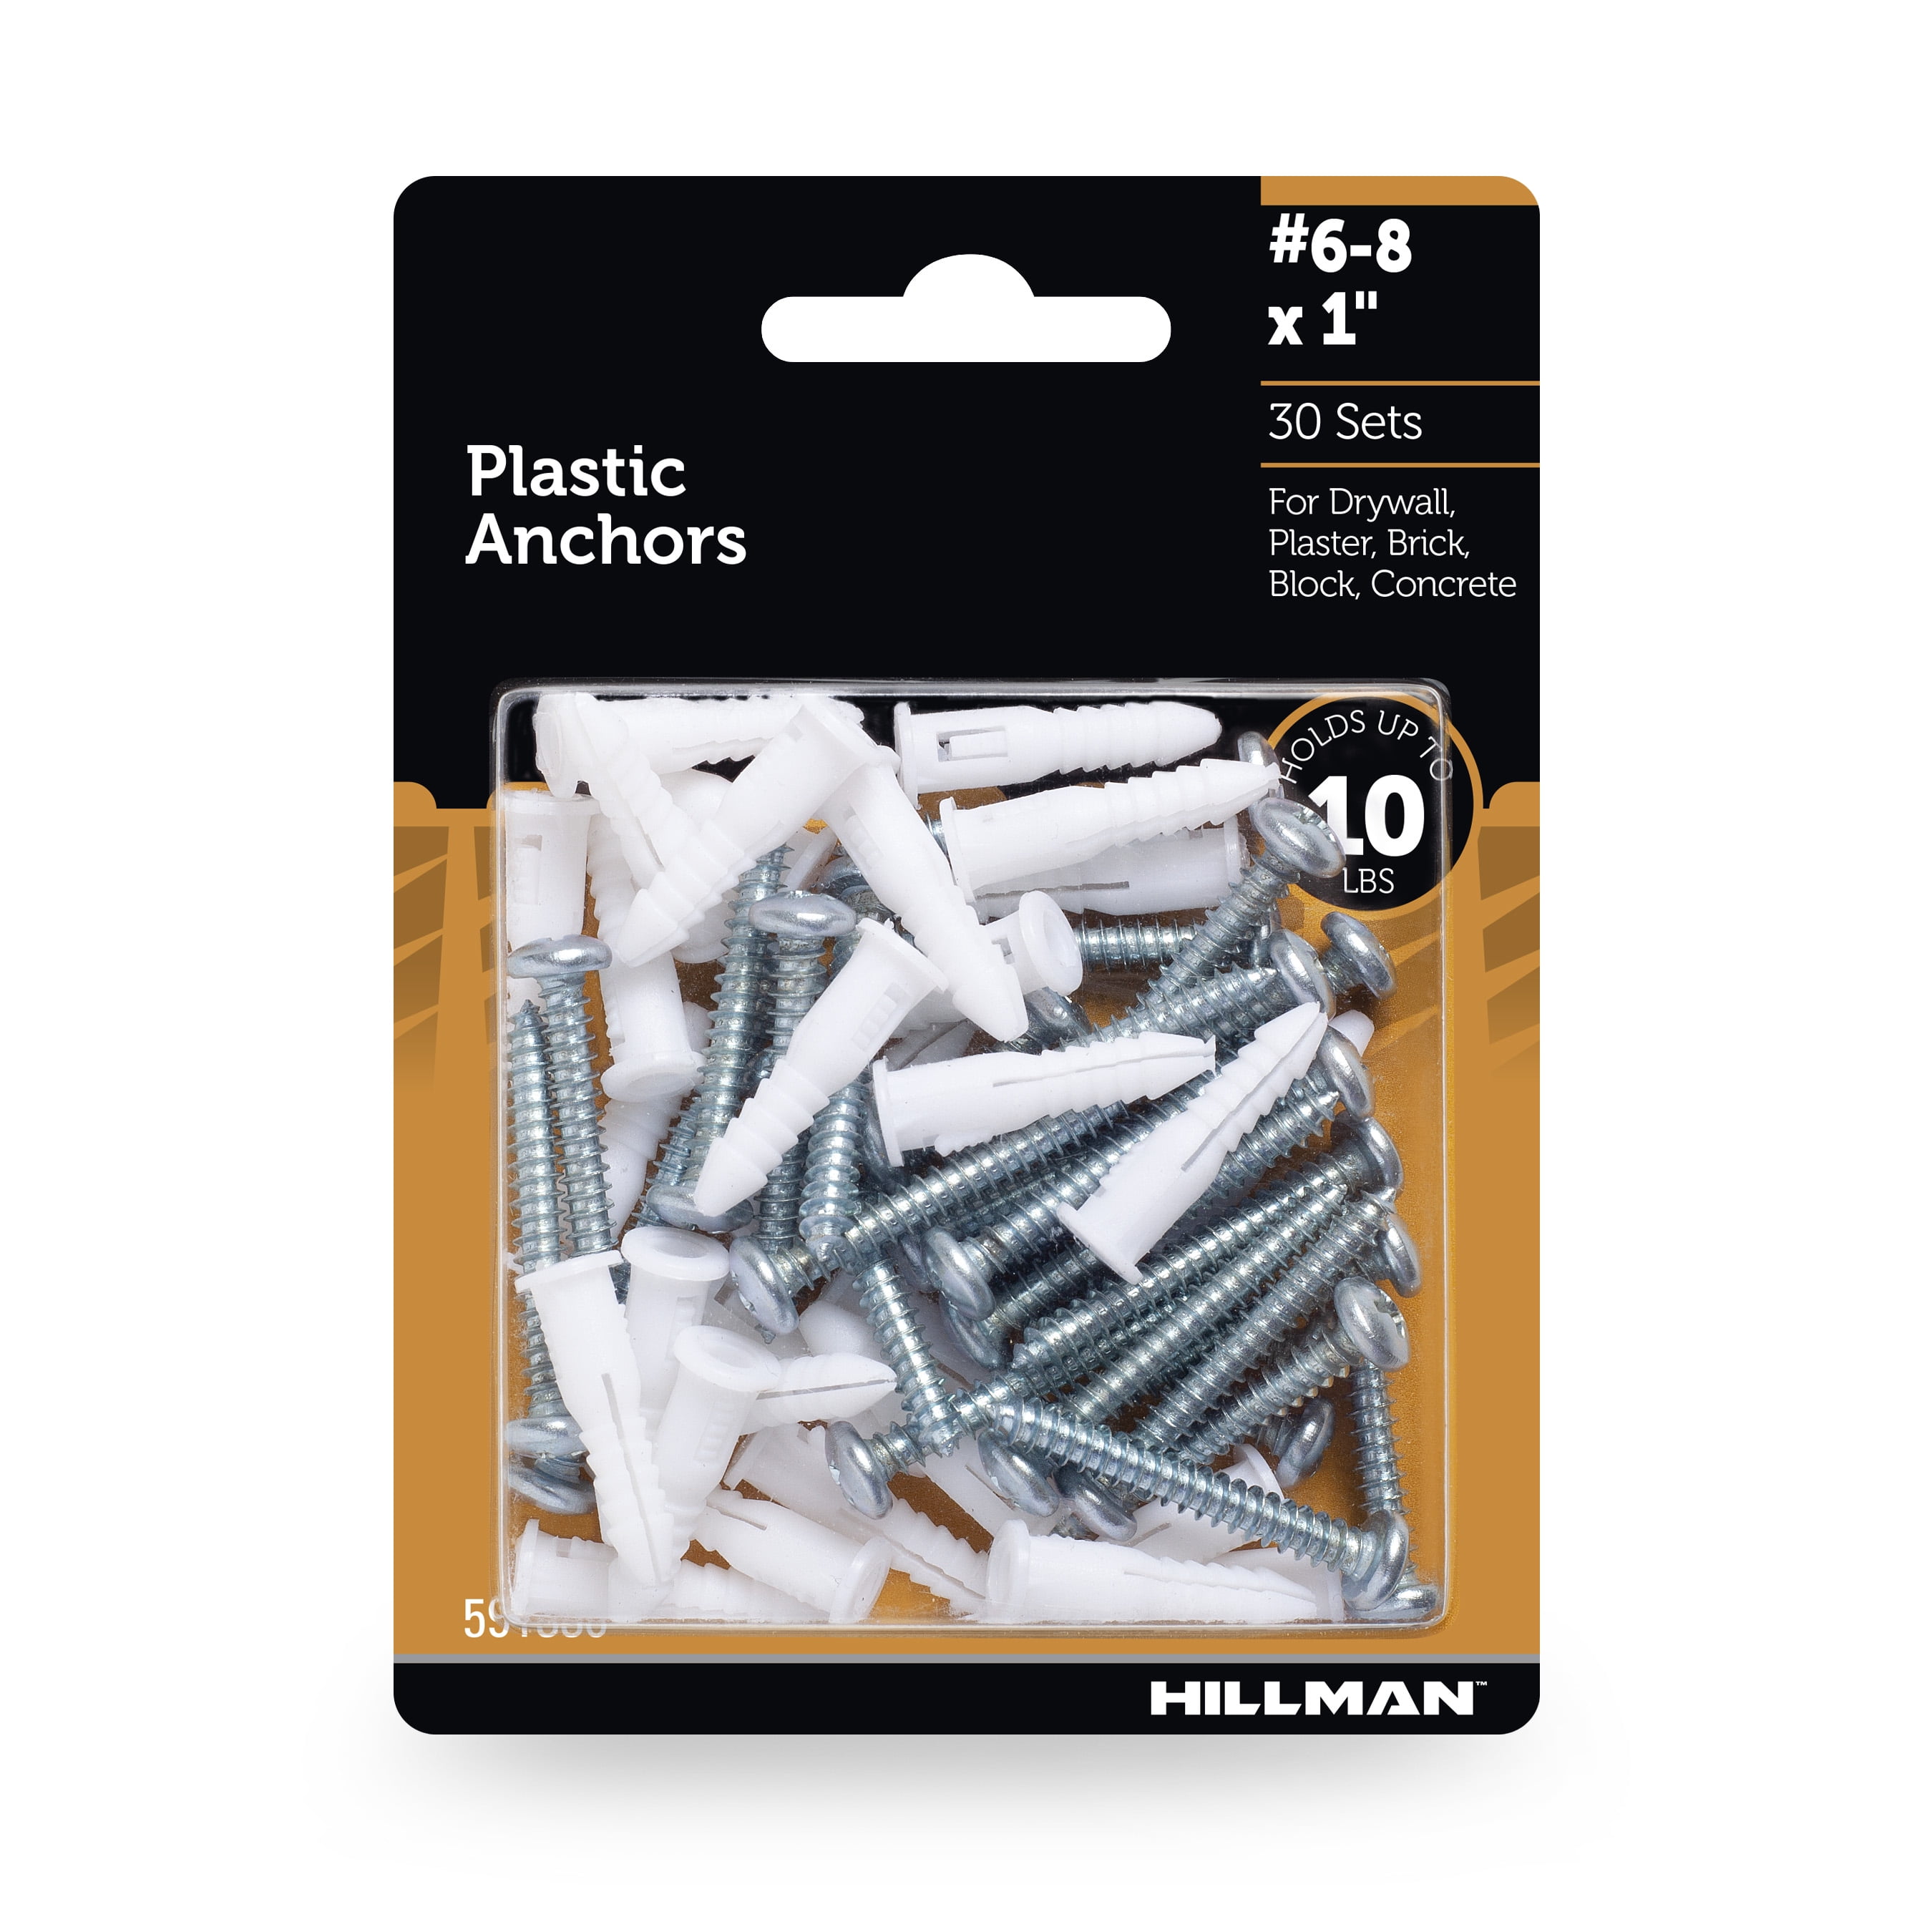 Hillman Plastic Anchors with Screws, #6-8 x 1", Holds up 10lbs, 30 Sets